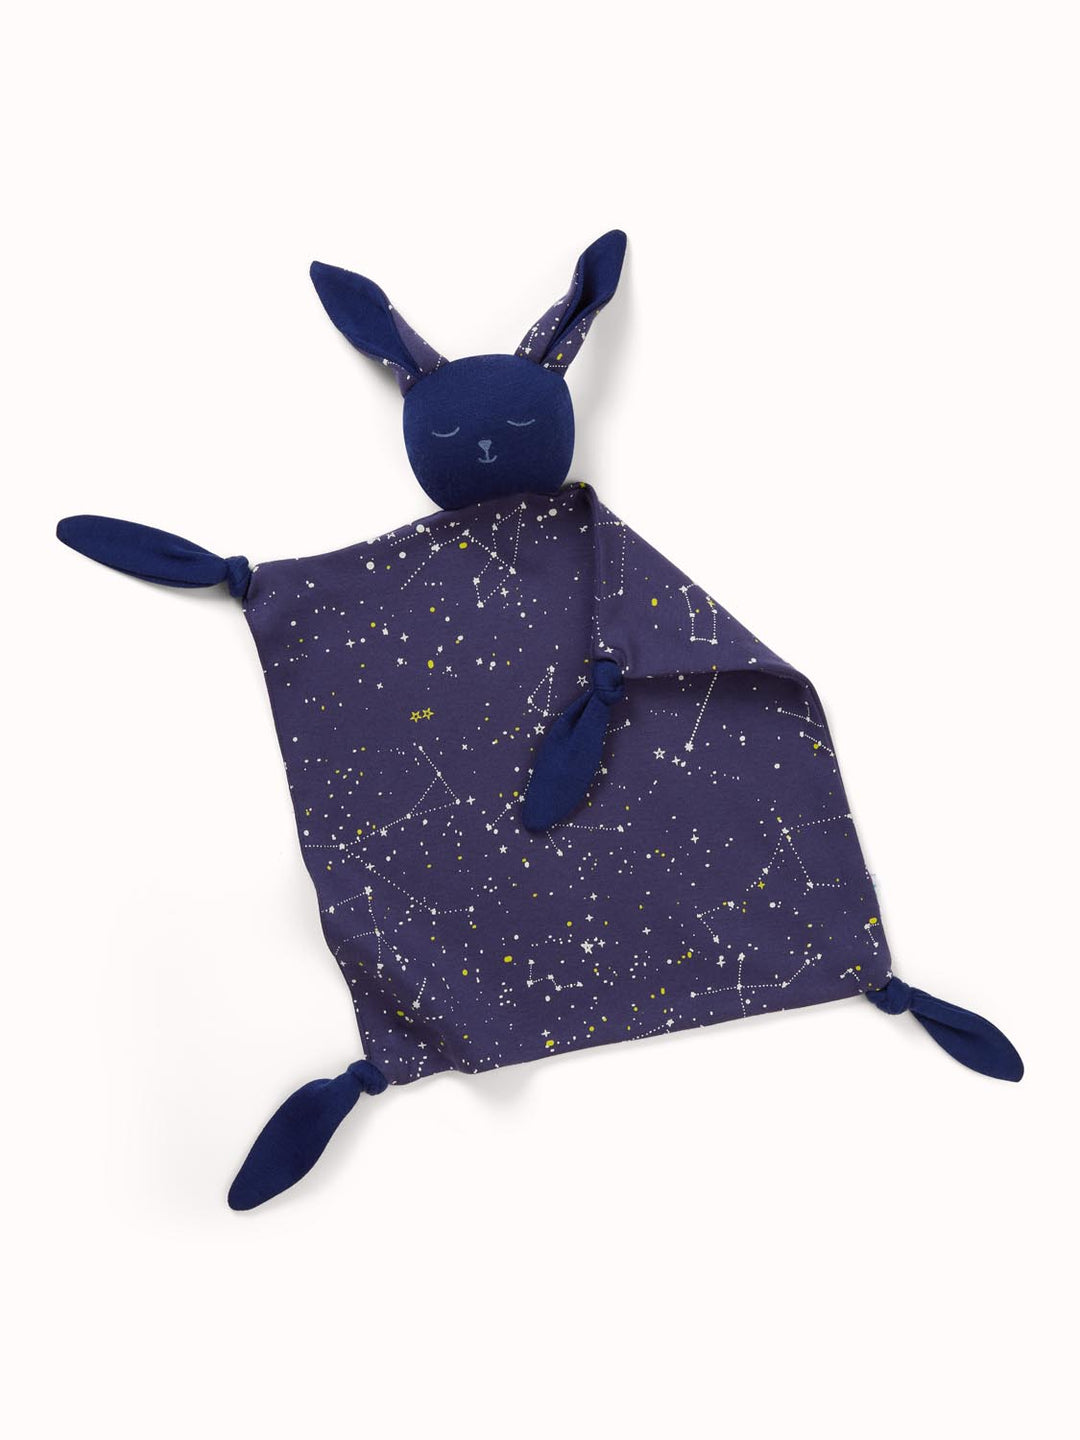 Imperfect Cuddle Bunny Comforter Imperfect Superlove Outlet SuperStar